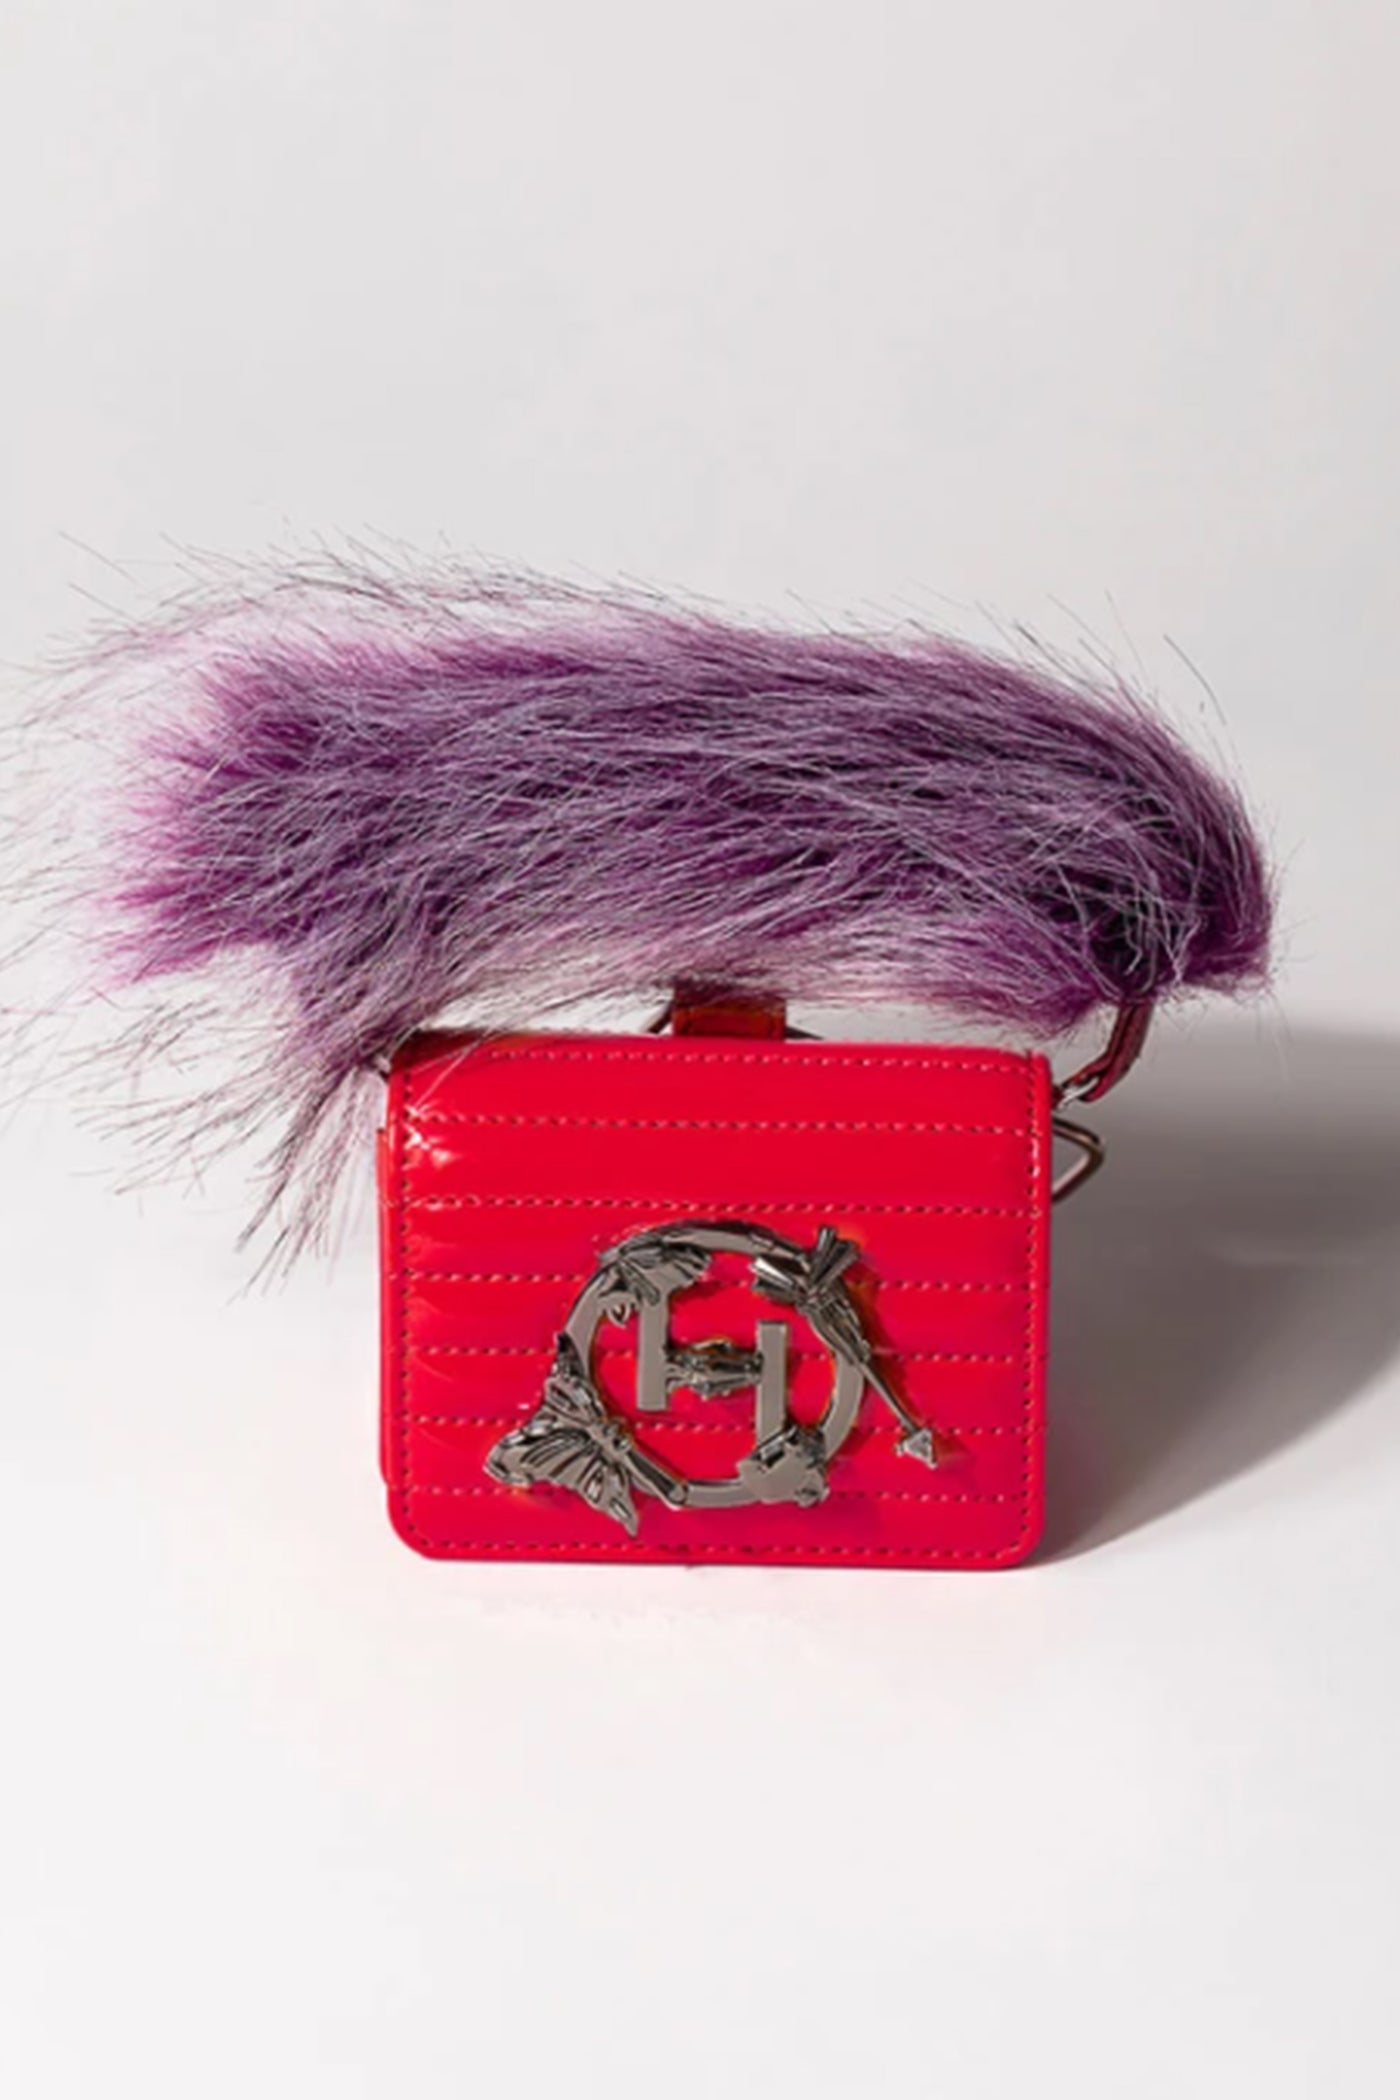 outhouse jewellery The Oh V Furbie - Scarlet Red bags accessories online shopping melange singapore indian designer wear